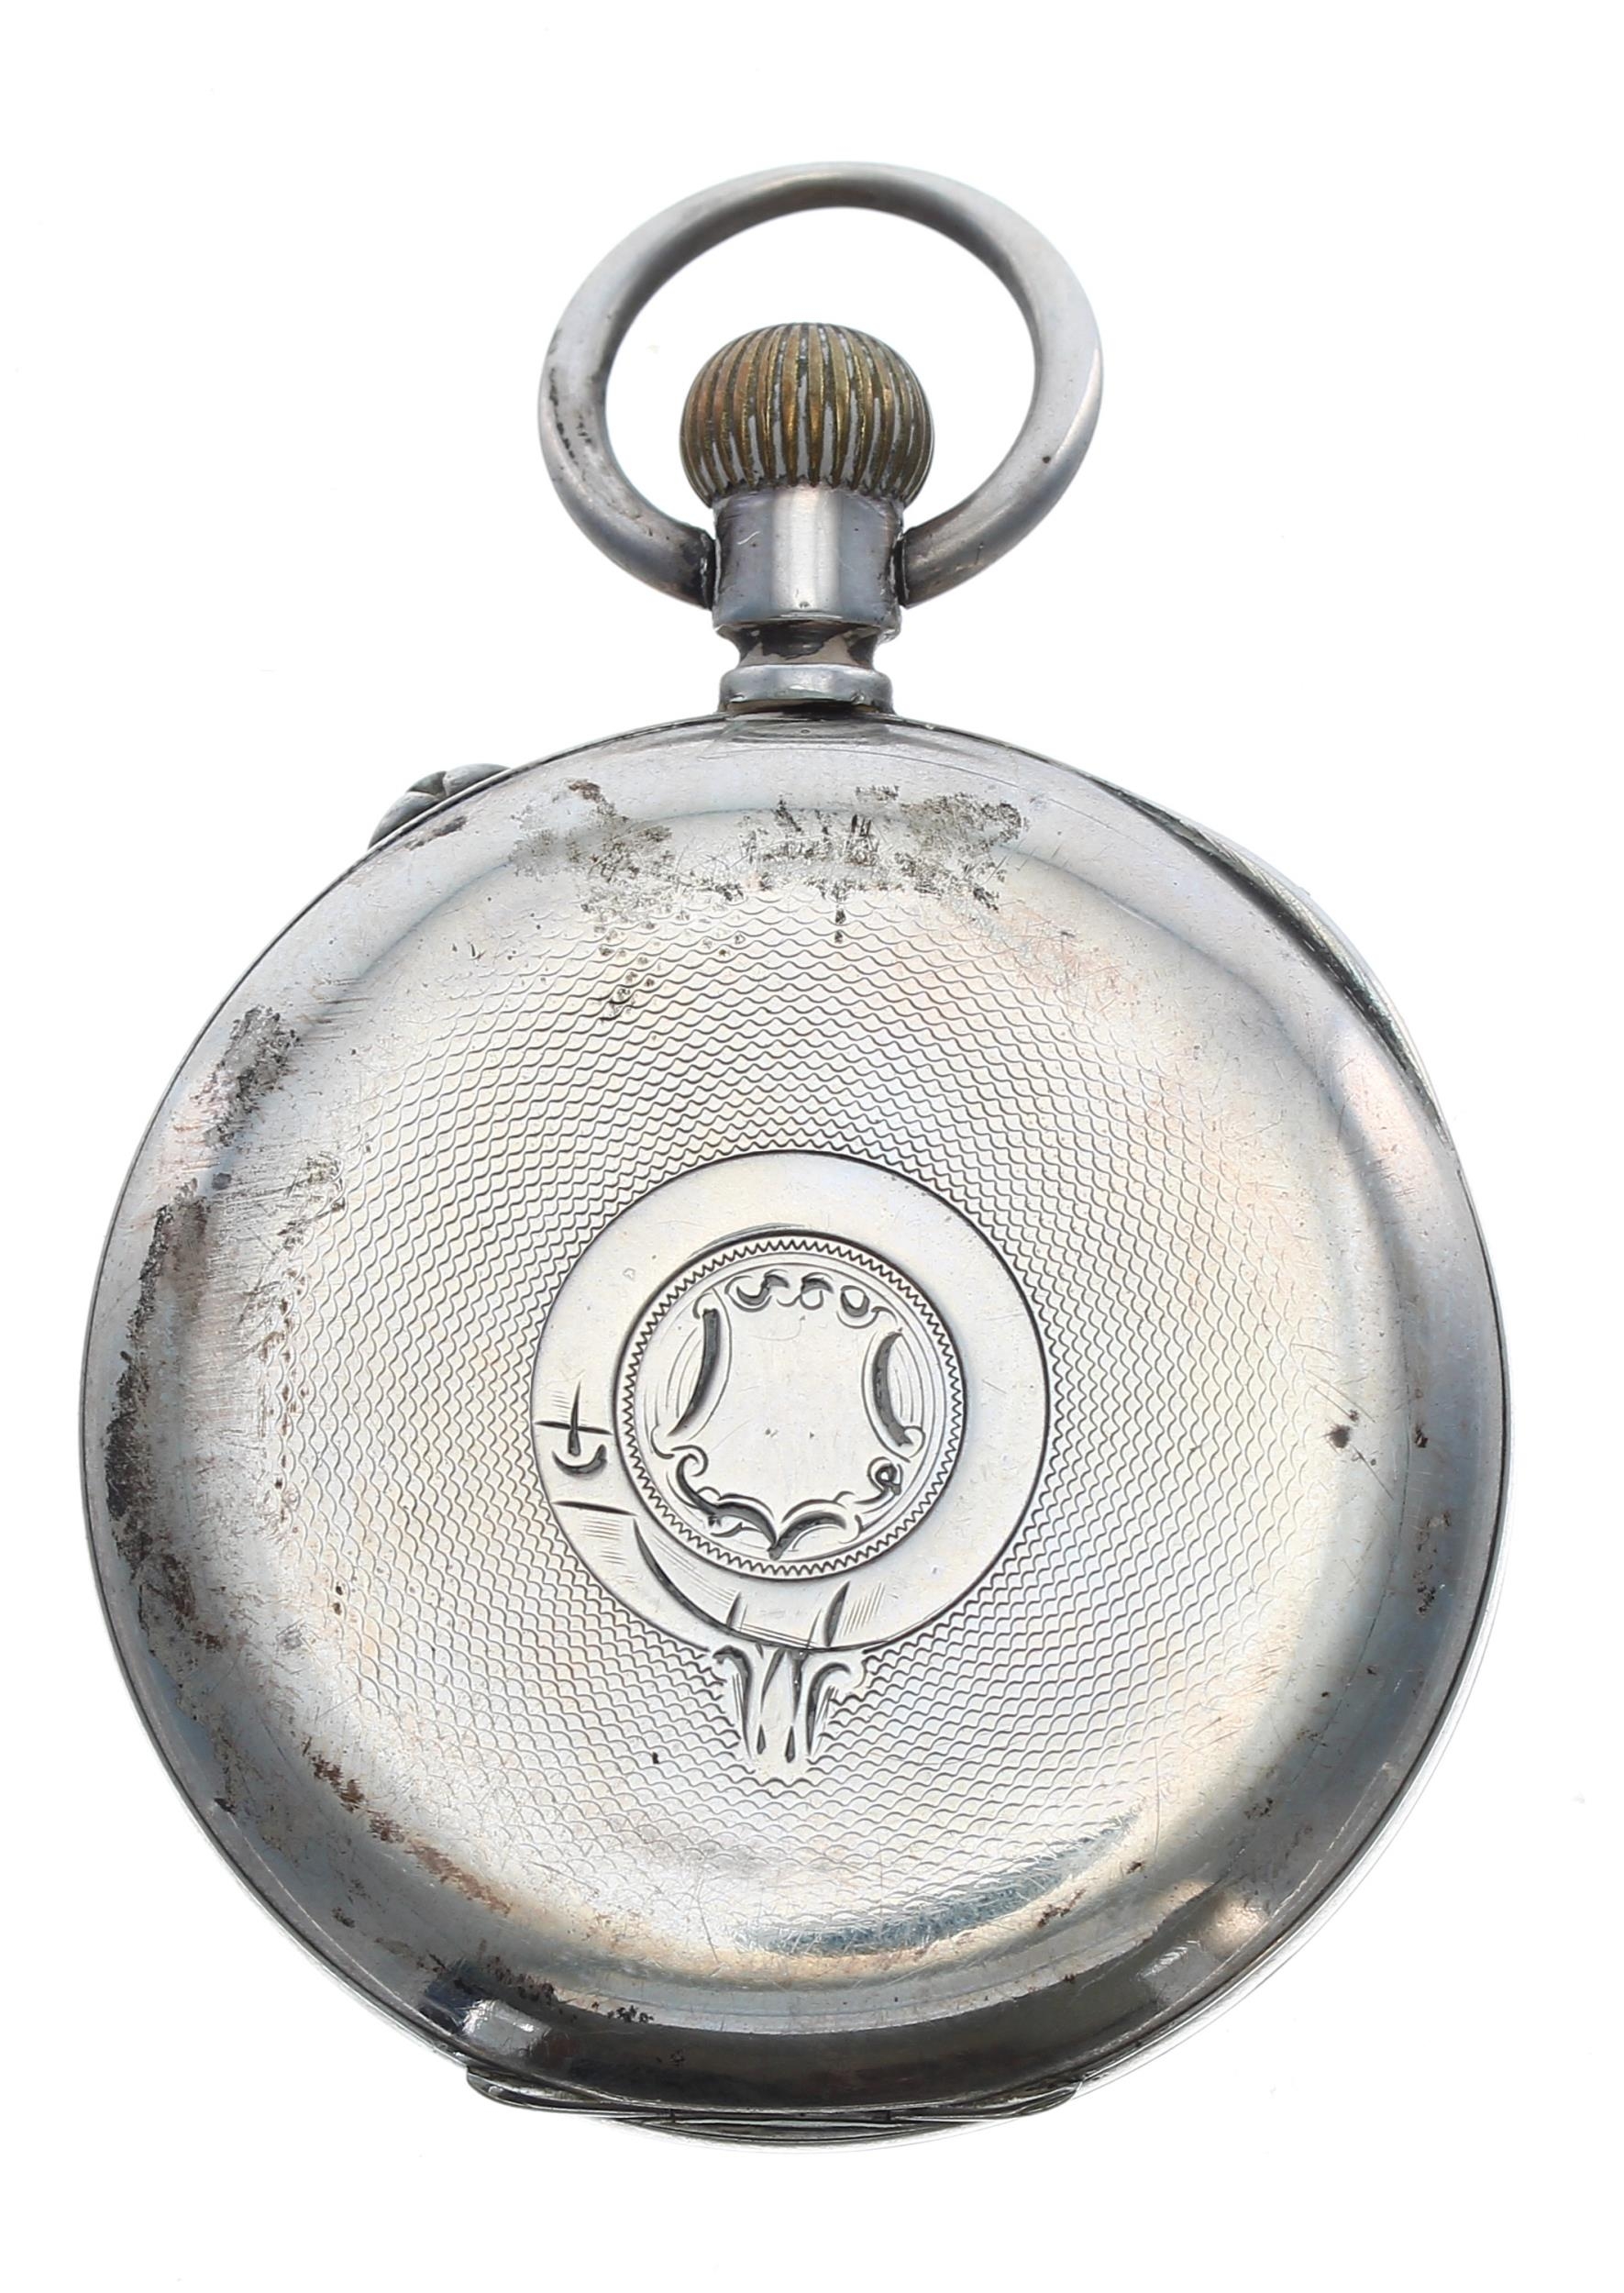 Stauffer Son & Co silver (0.935) lever engine turned pocket watch, signed gilt frosted movement, no. - Image 2 of 3